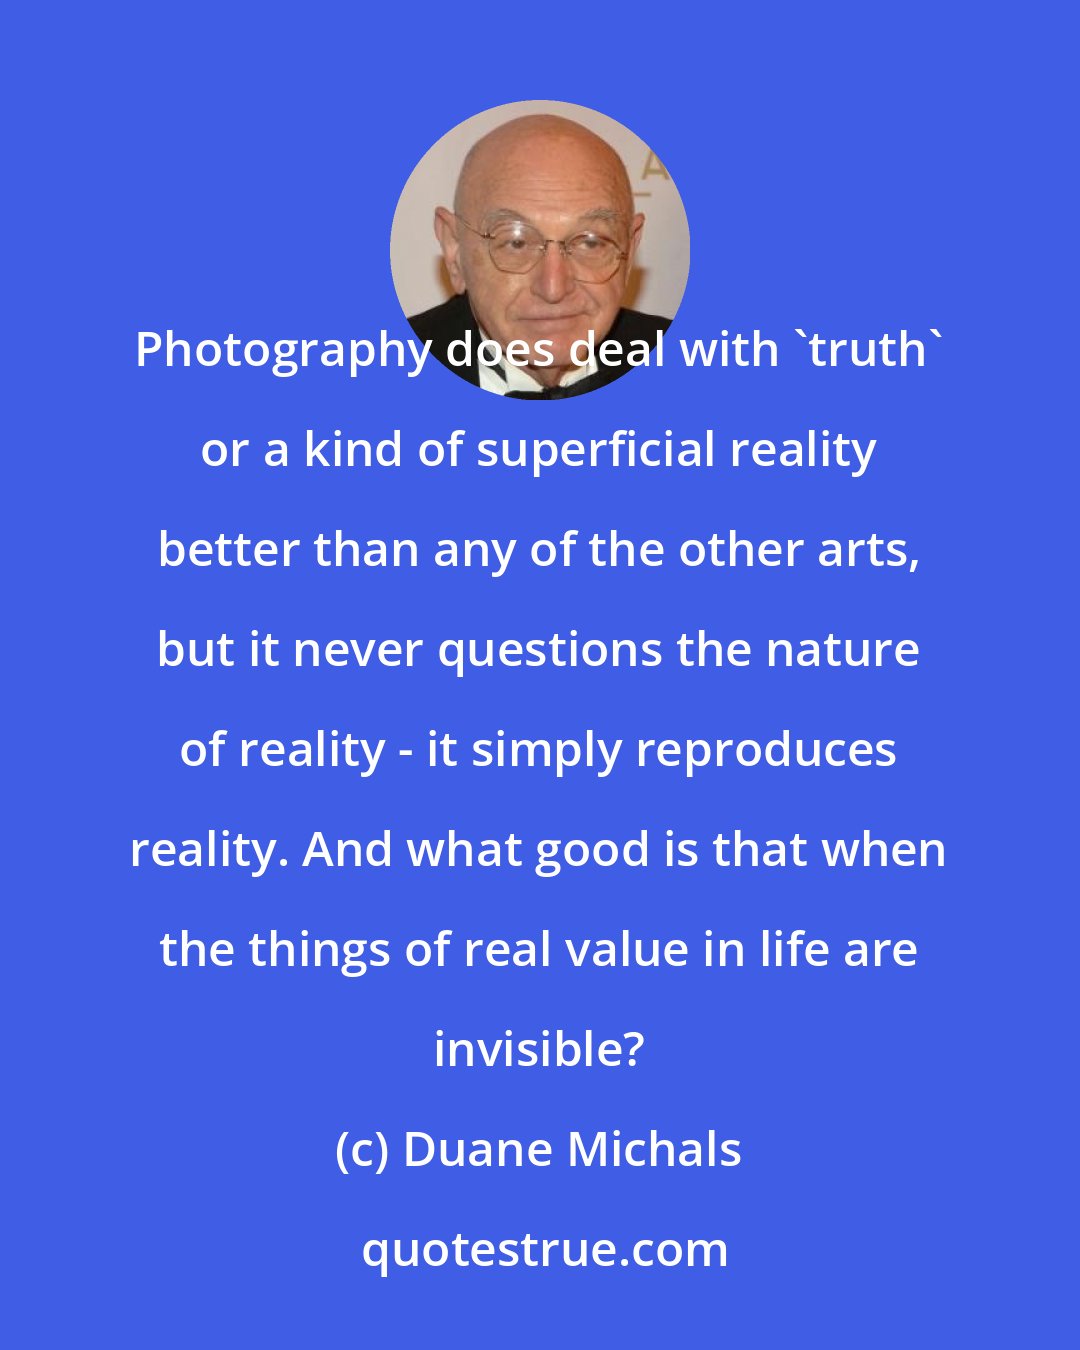 Duane Michals: Photography does deal with 'truth' or a kind of superficial reality better than any of the other arts, but it never questions the nature of reality - it simply reproduces reality. And what good is that when the things of real value in life are invisible?